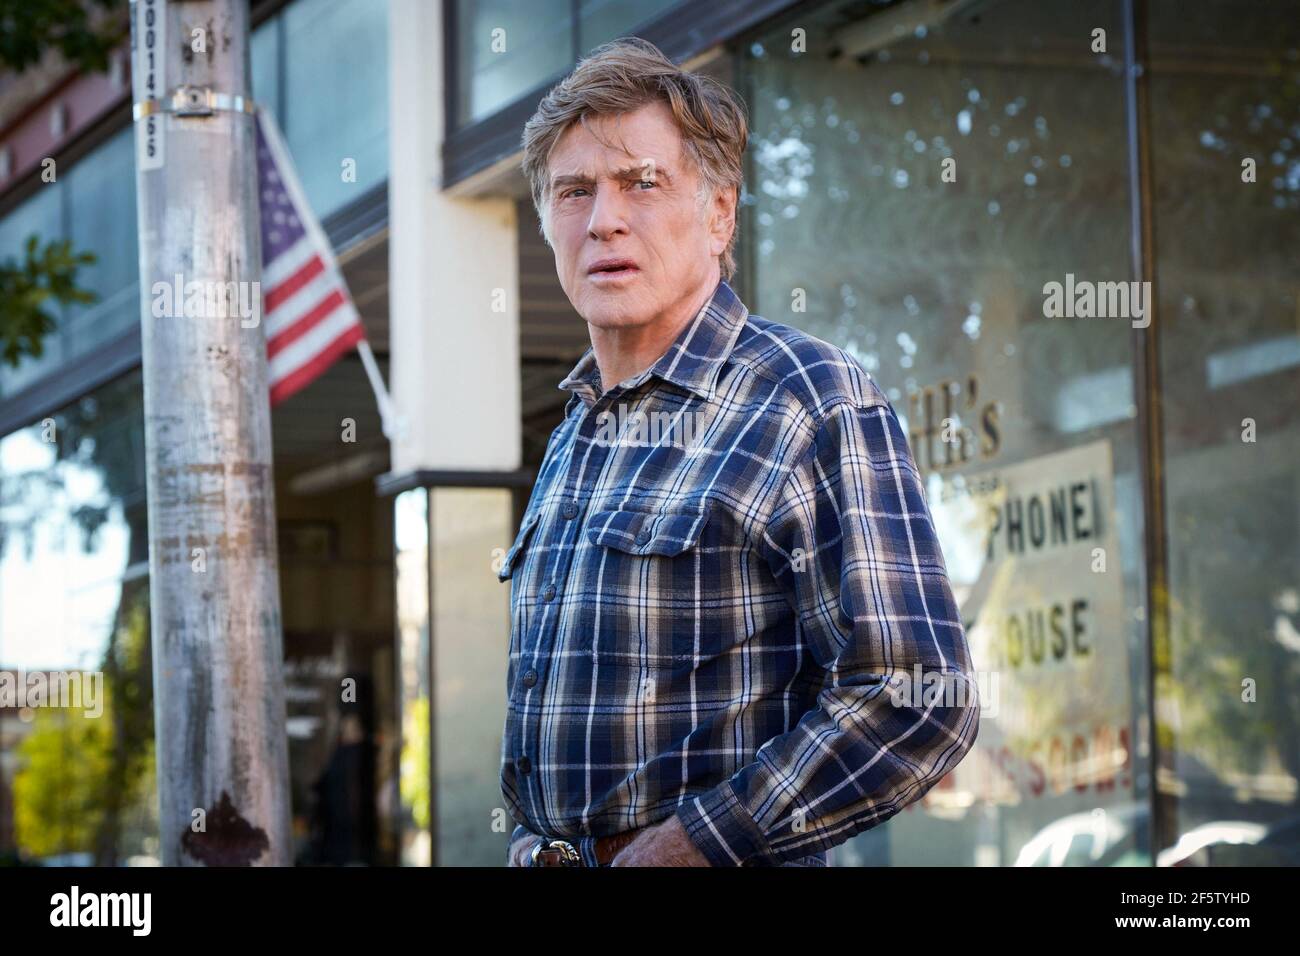 ROBERT REDFORD in OUR SOULS AT NIGHT (2017), directed by RITESH BATRA. Credit: Netflix / Wildgaze Films / Album Stock Photo